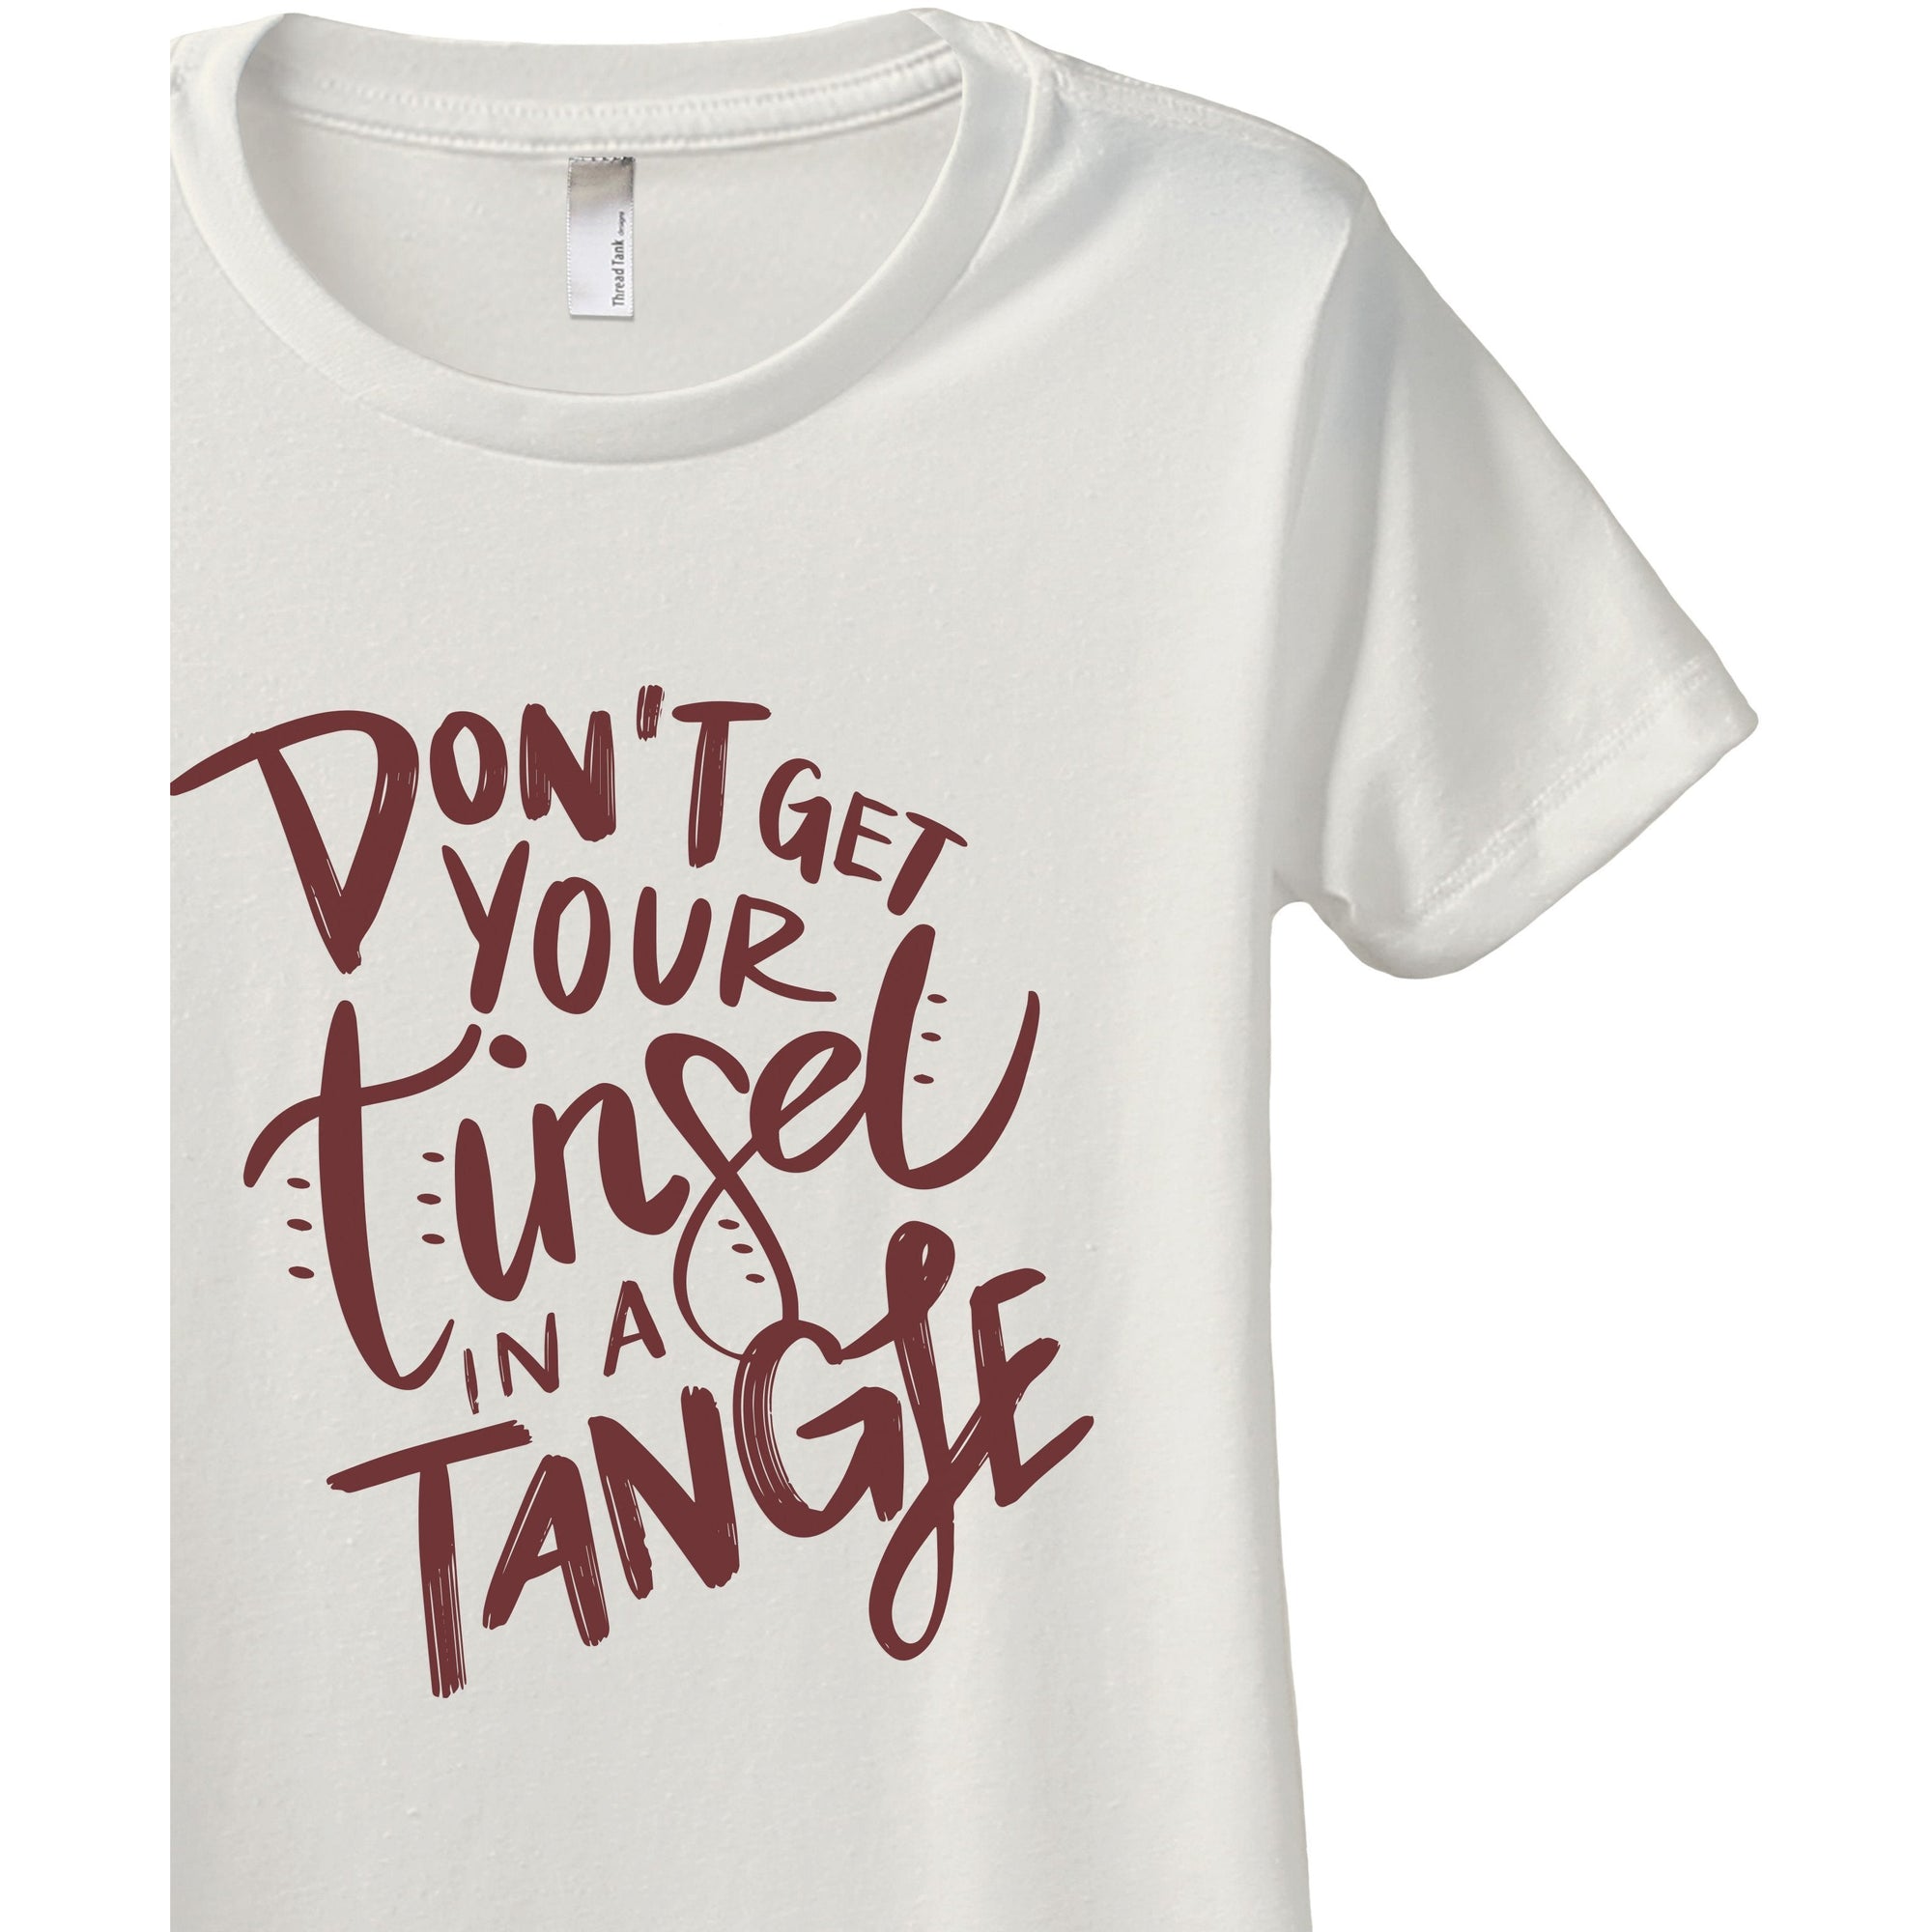 Don't Get Your Tinsel In A Tangle Women's Relaxed Crewneck T-Shirt Top Tee Vintage White Scarlet Scarlet Print Zoom Details